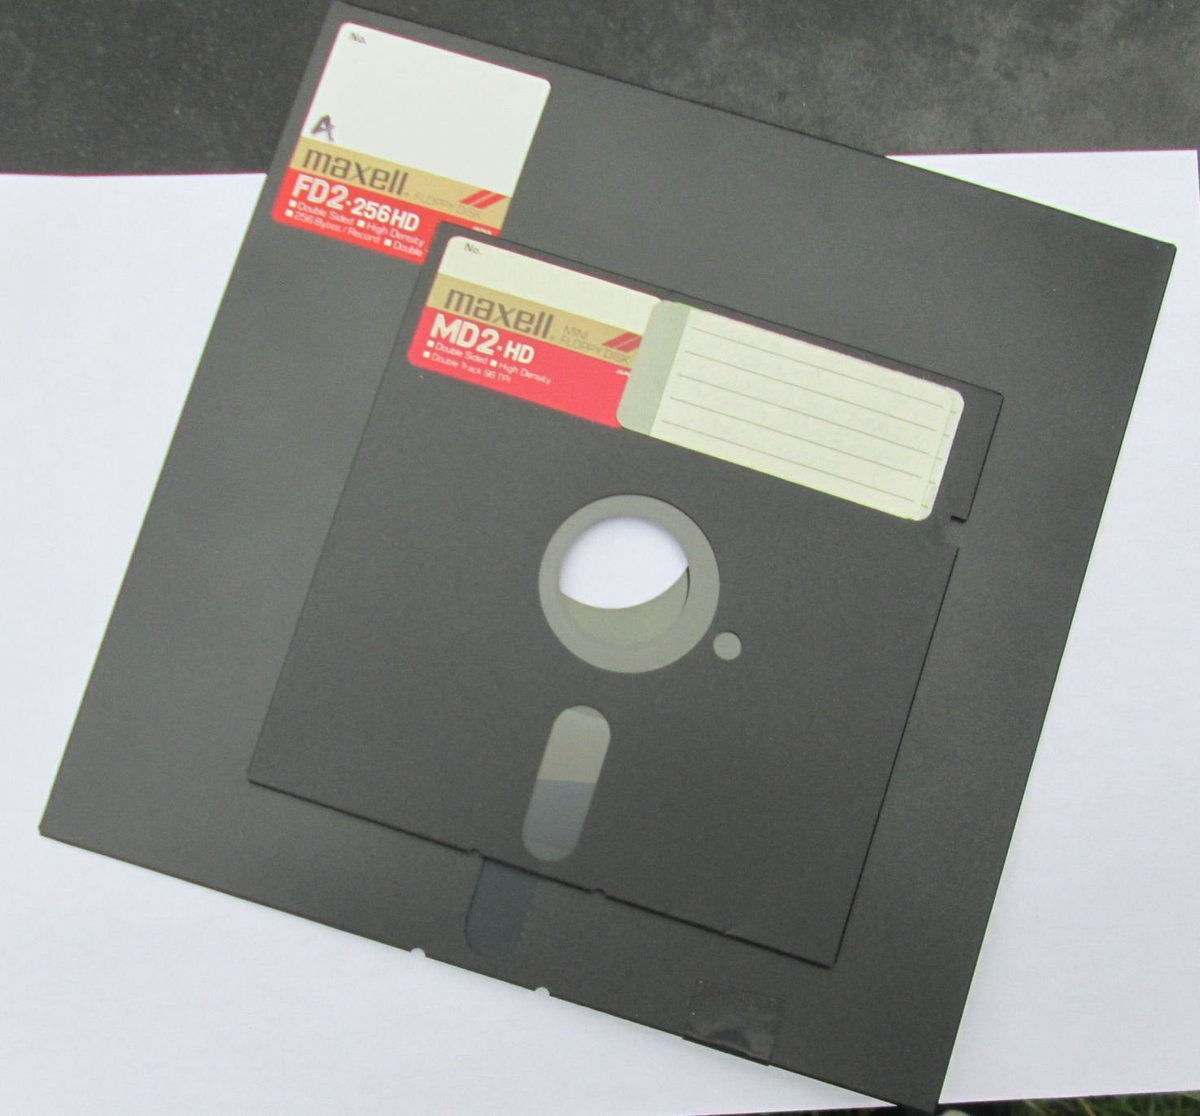 The shrinking of the 8" down to 5.25" was also related to Shugart: Wang Labs was building desktop word processor machines and thought 8" disks were too big and expensive, and worked with Shugart Associates to develop a smaller disk drive for consumer use.